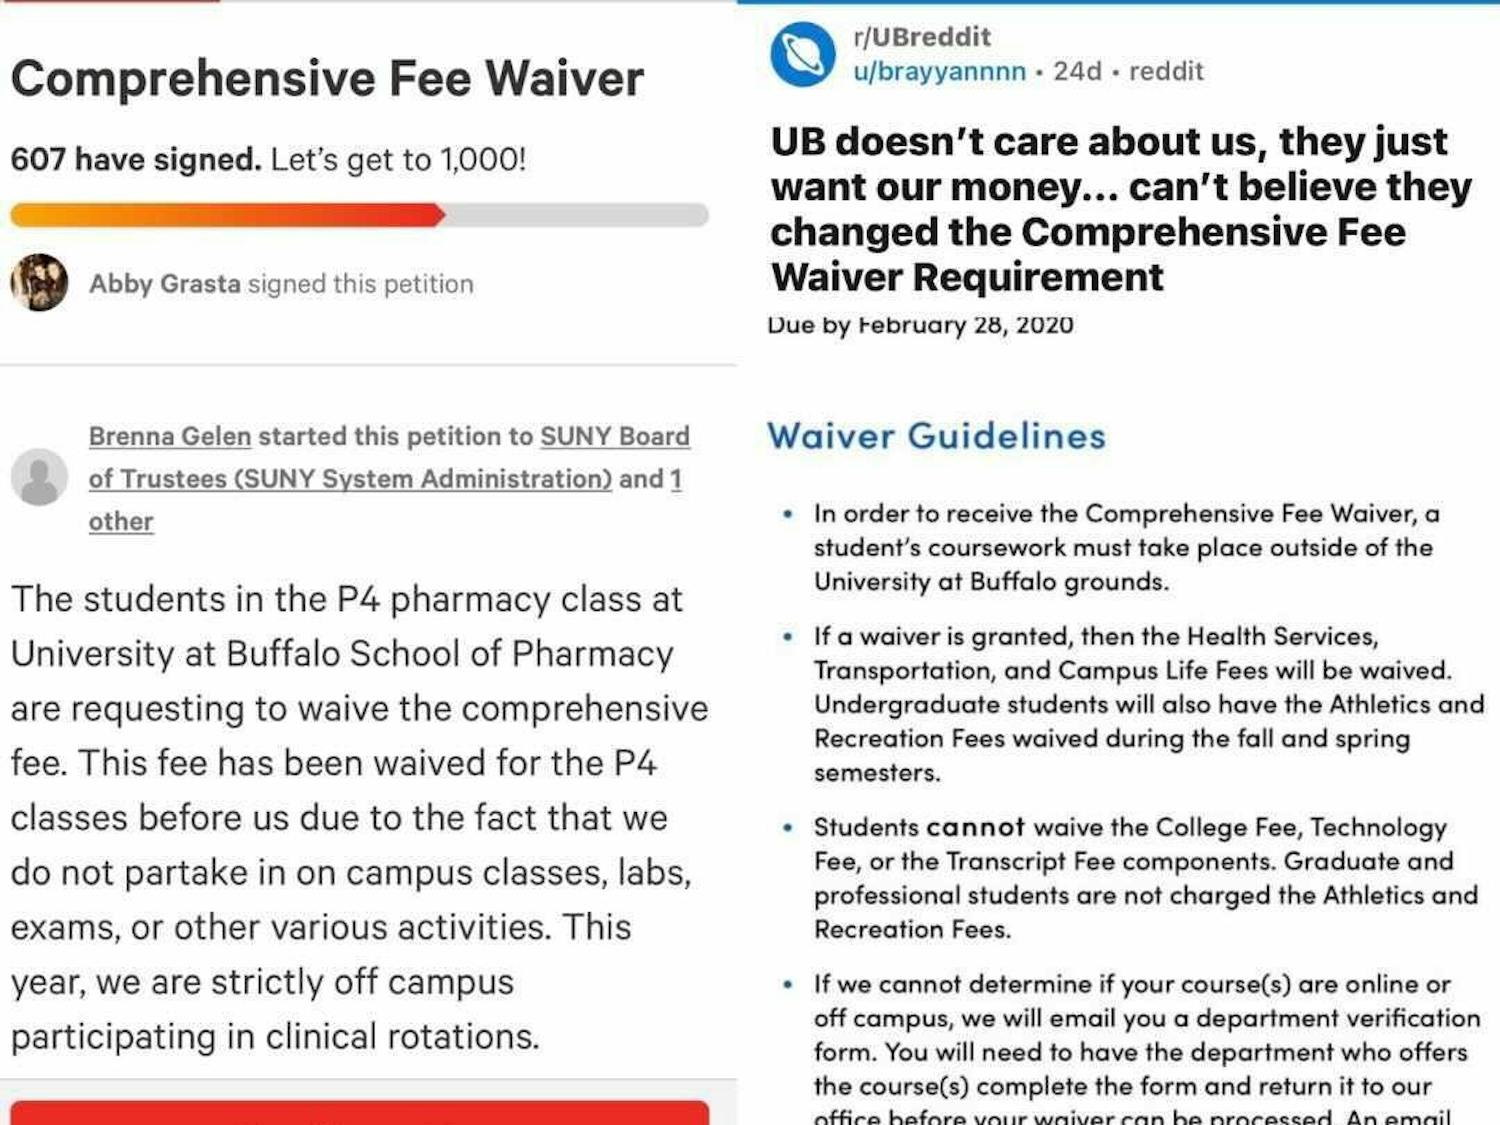 &nbsp;From left to right: Screenshots of pharmacy student petition and Reddit post.&nbsp;